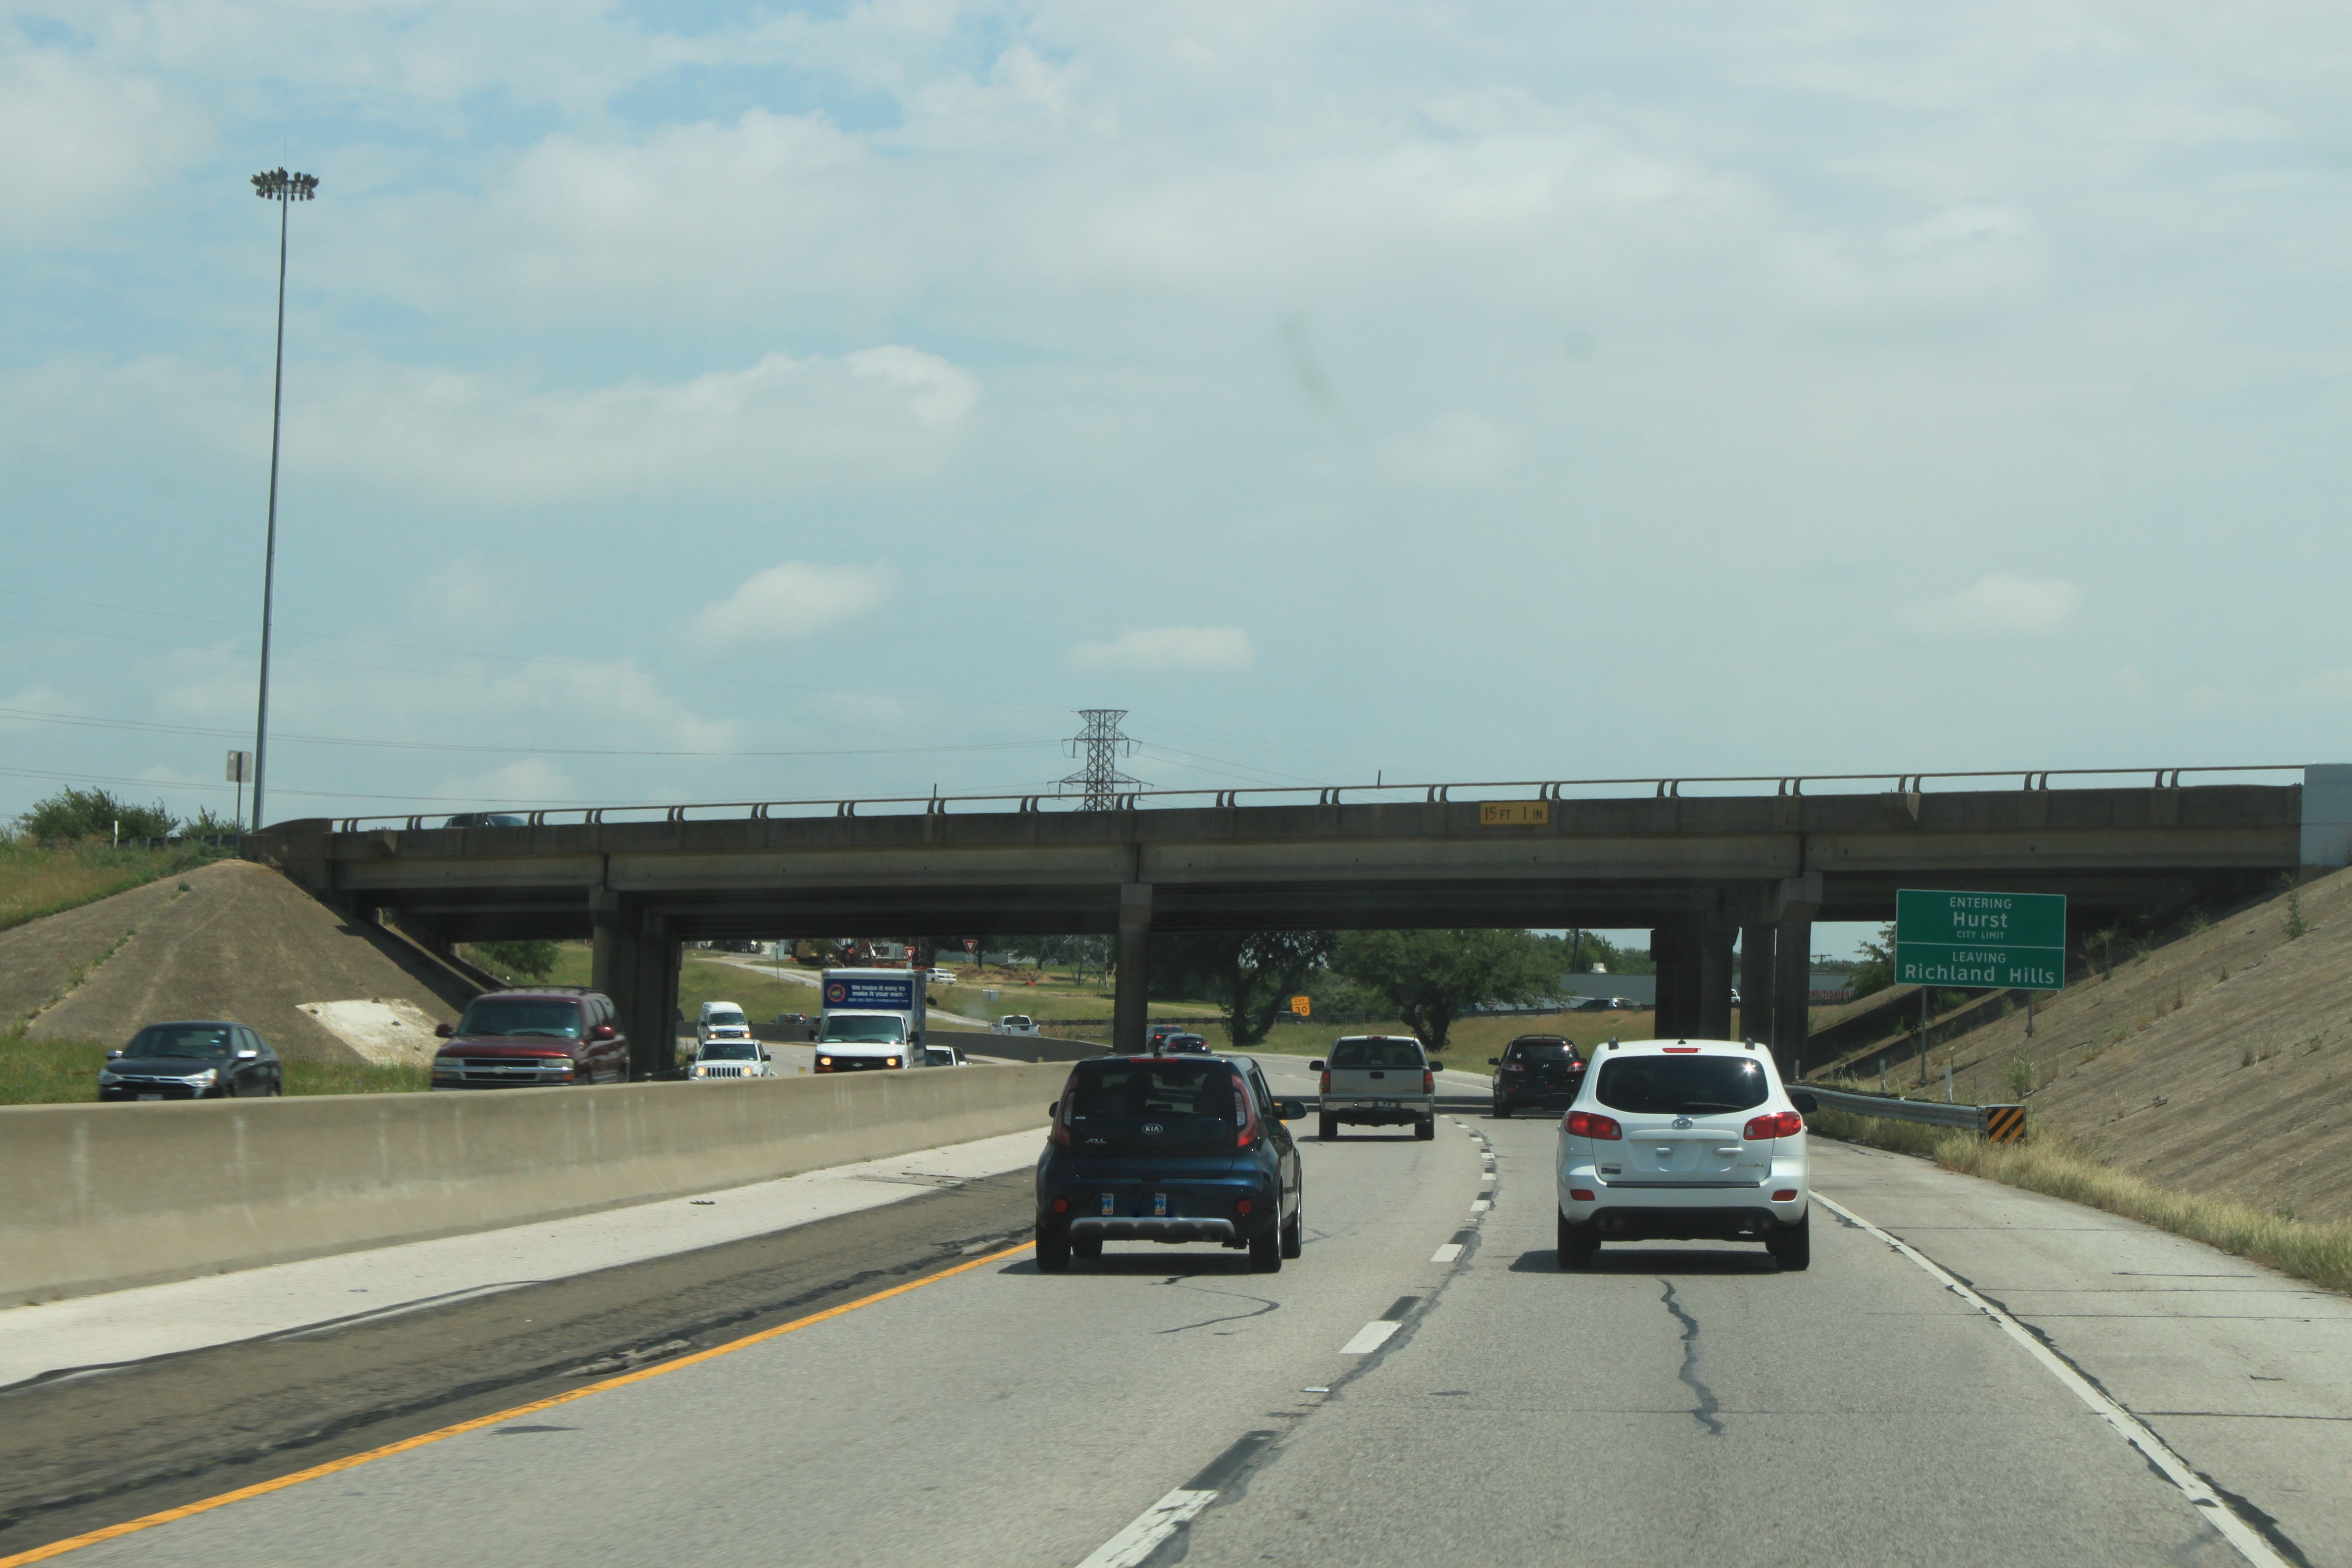 SH 121 northbound approaching the Hurst-Richland Hills city limits and I-820 southbound overpass.